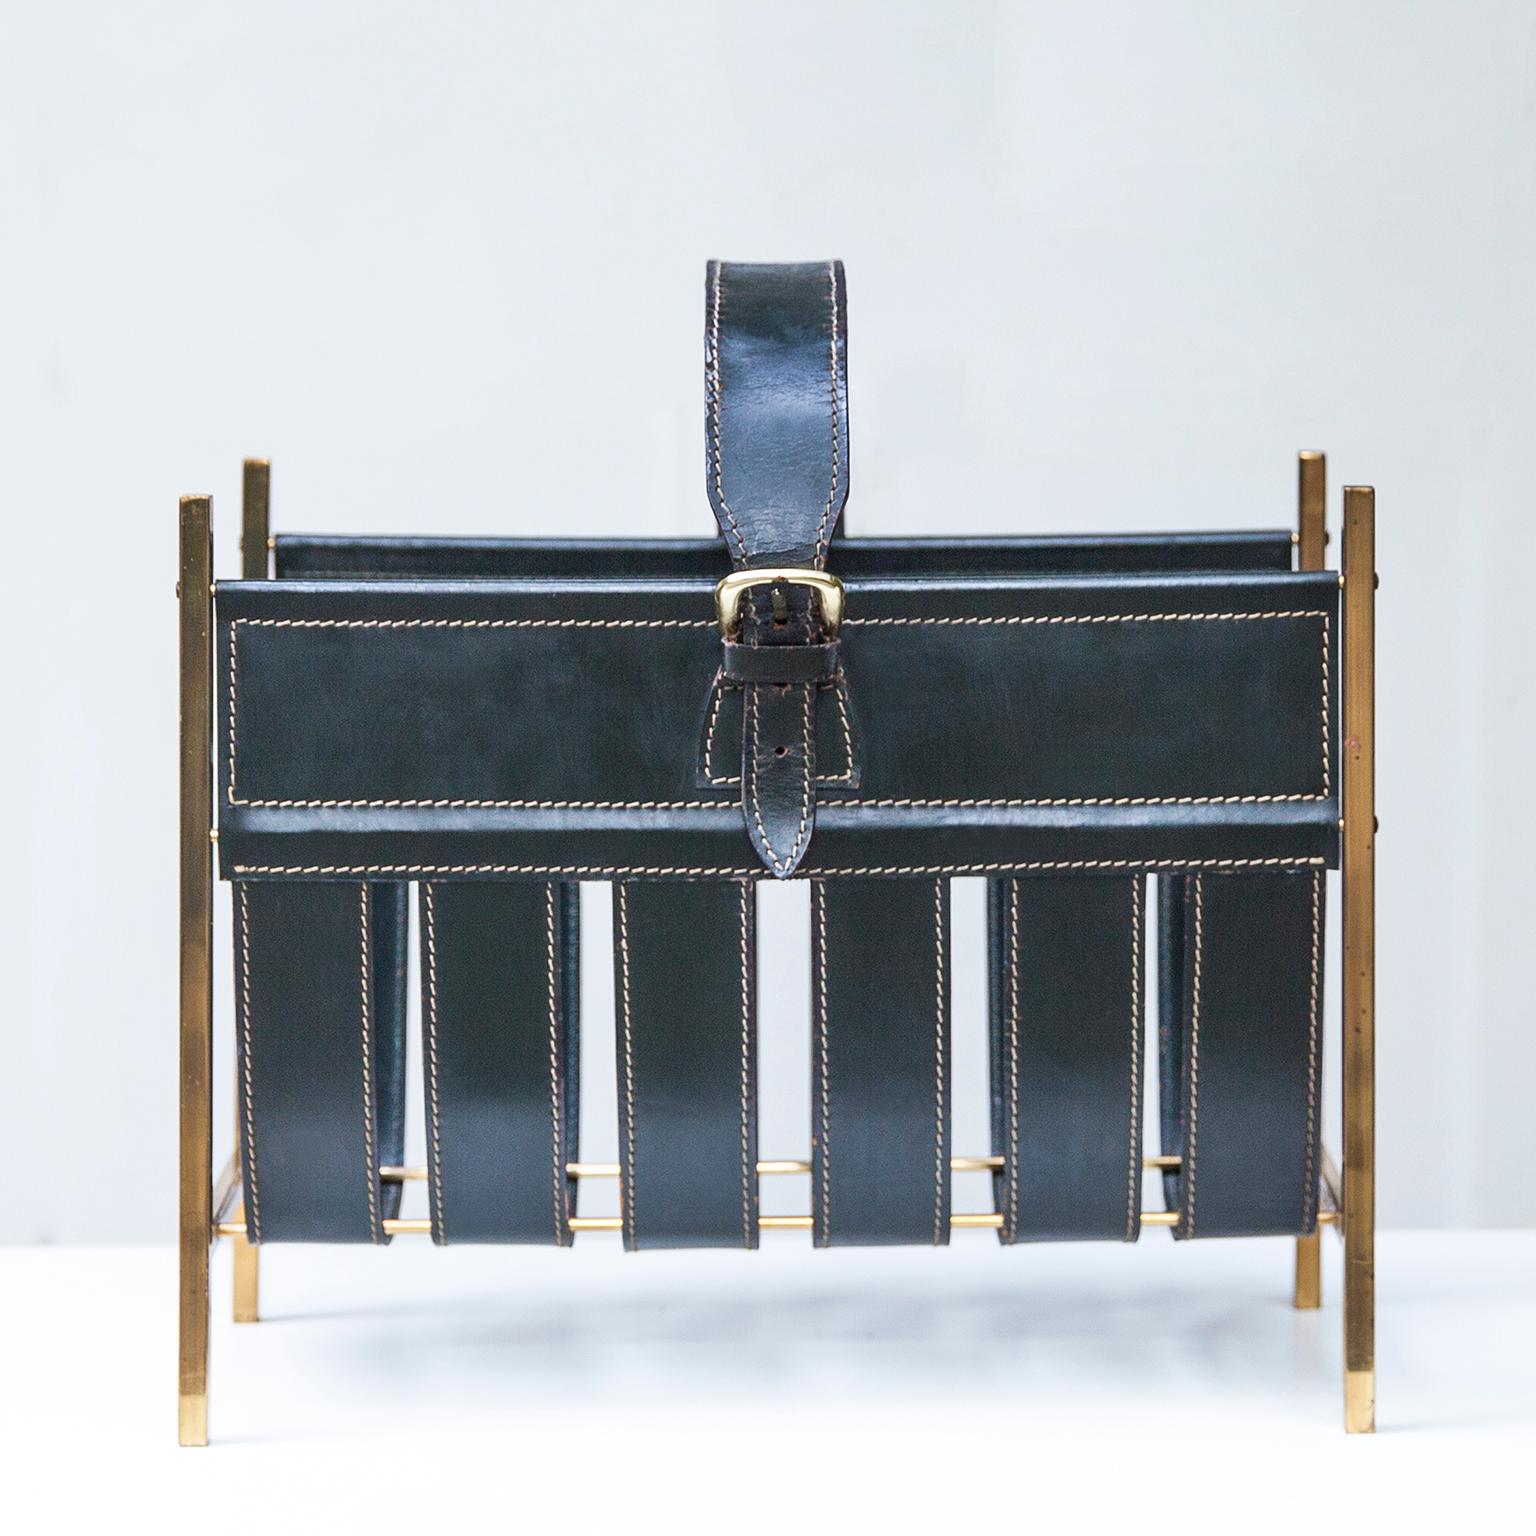 Elegant magazine rack attributed to the French designer Jacques Adnet in 1950, Jacques Adnet developed a collection of furniture and accessories for Hermès, this magazine rack could be a part of this collection. Green handstitched leather and brass